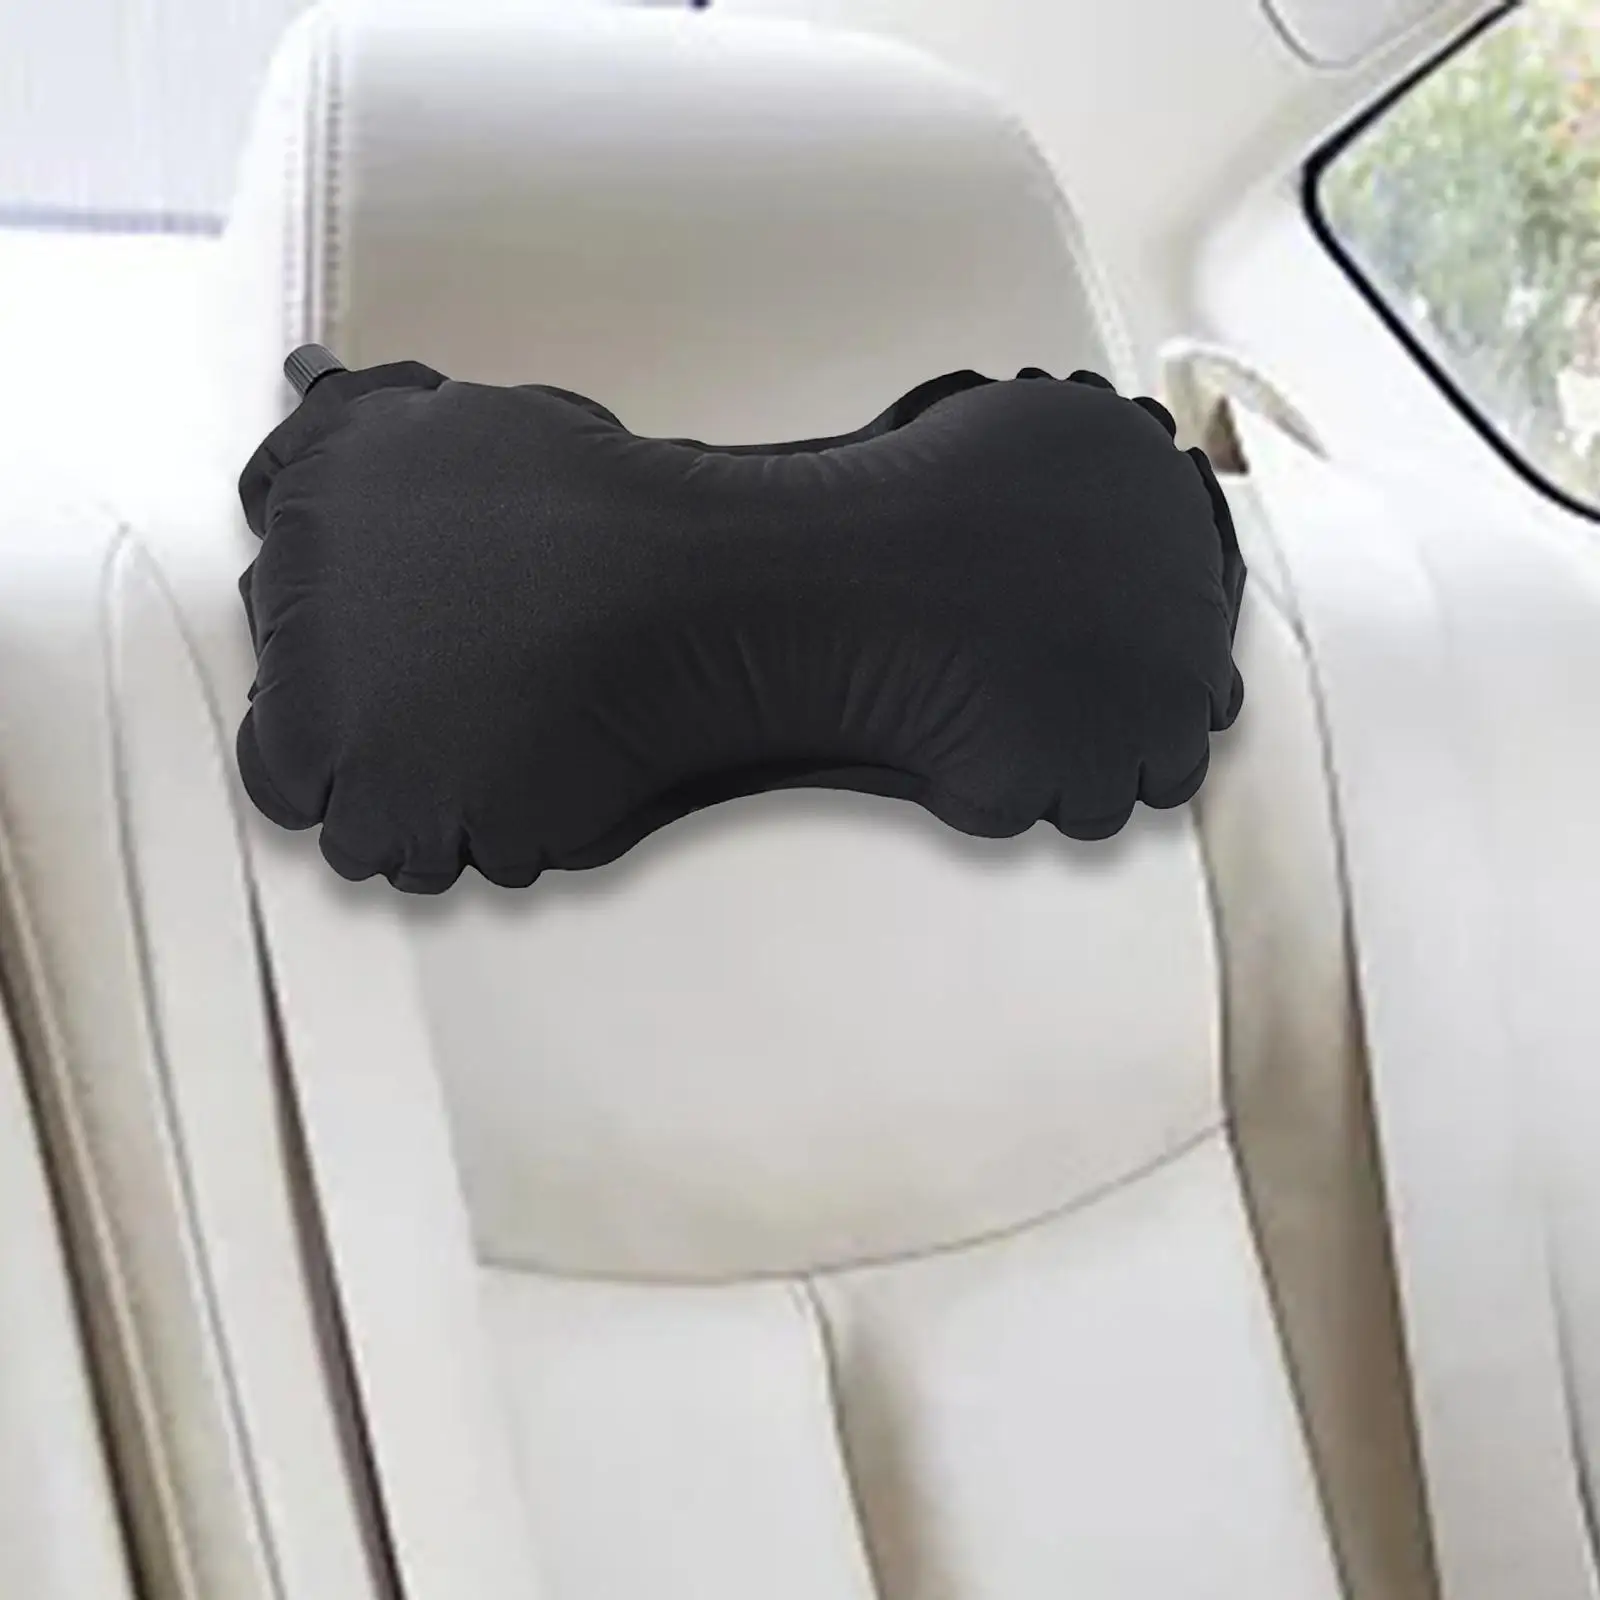 Inflatable Pillow Camping with Buckle Straps Portable Durable Ultralight Lumbar Support Pillow for Backpacking Driving Seat